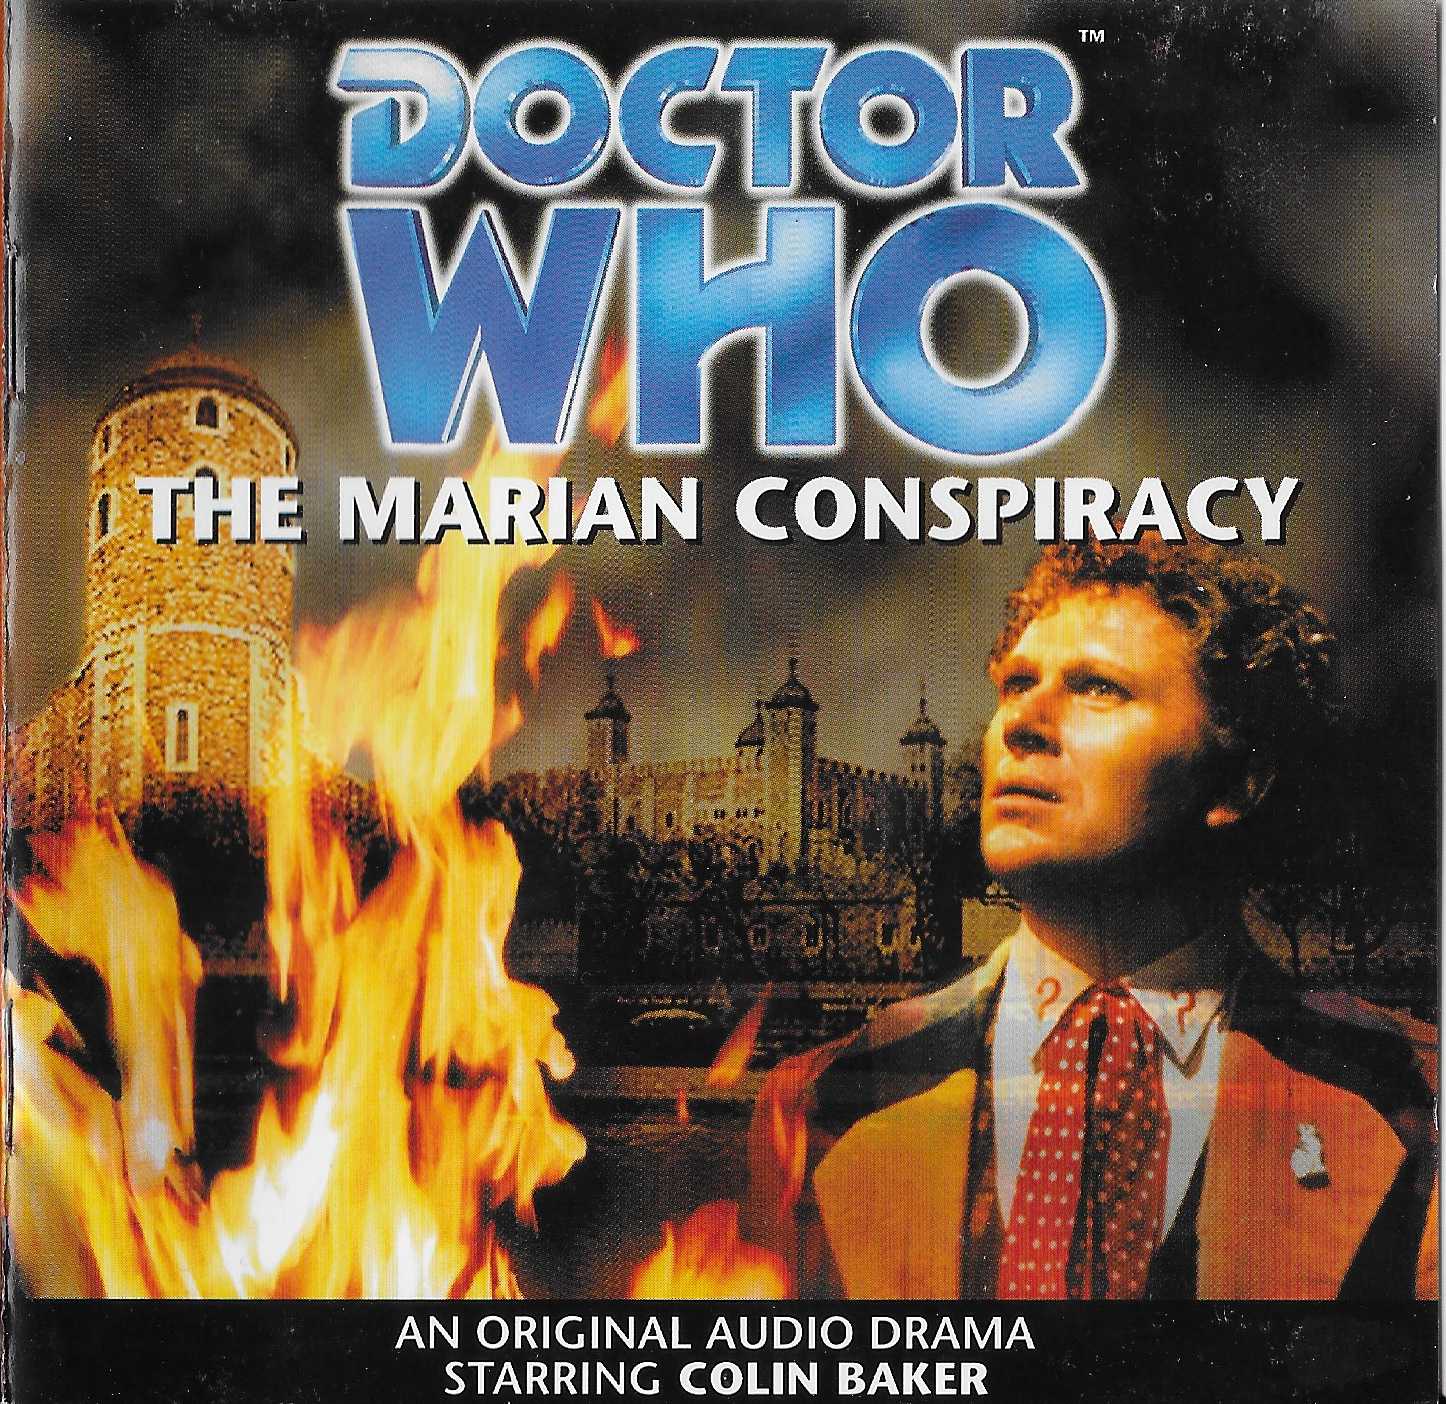 Picture of Doctor Who - The Marian conspiracy by artist Jacqueline Rayner from the BBC cds - Records and Tapes library